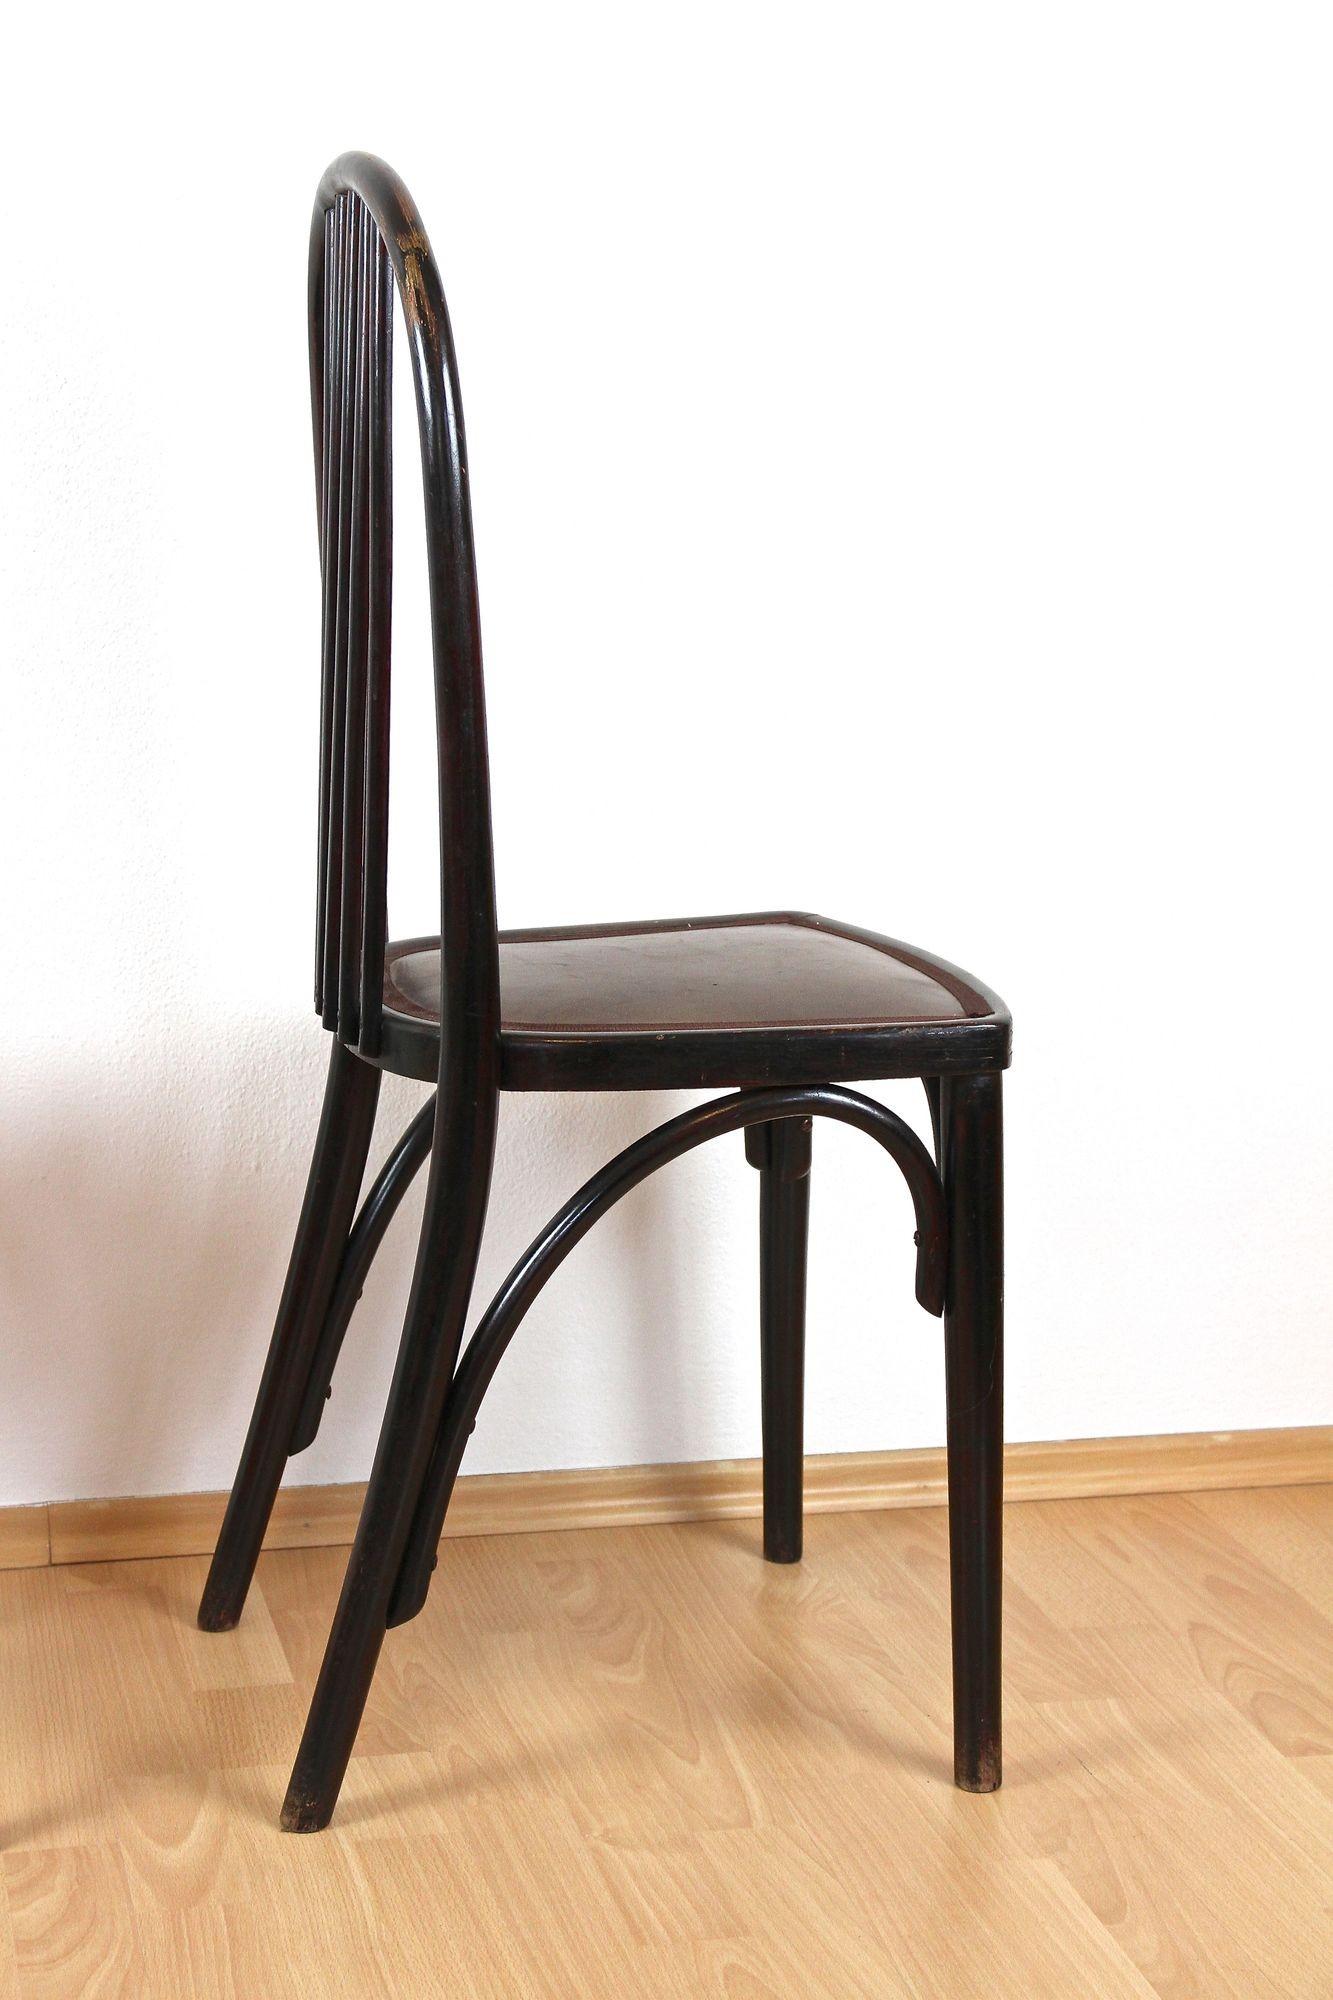 Leather Pair Of Art Nouveau Thonet Chairs by Josef Hoffmann, 1st edition! - CZ ca. 1906 For Sale